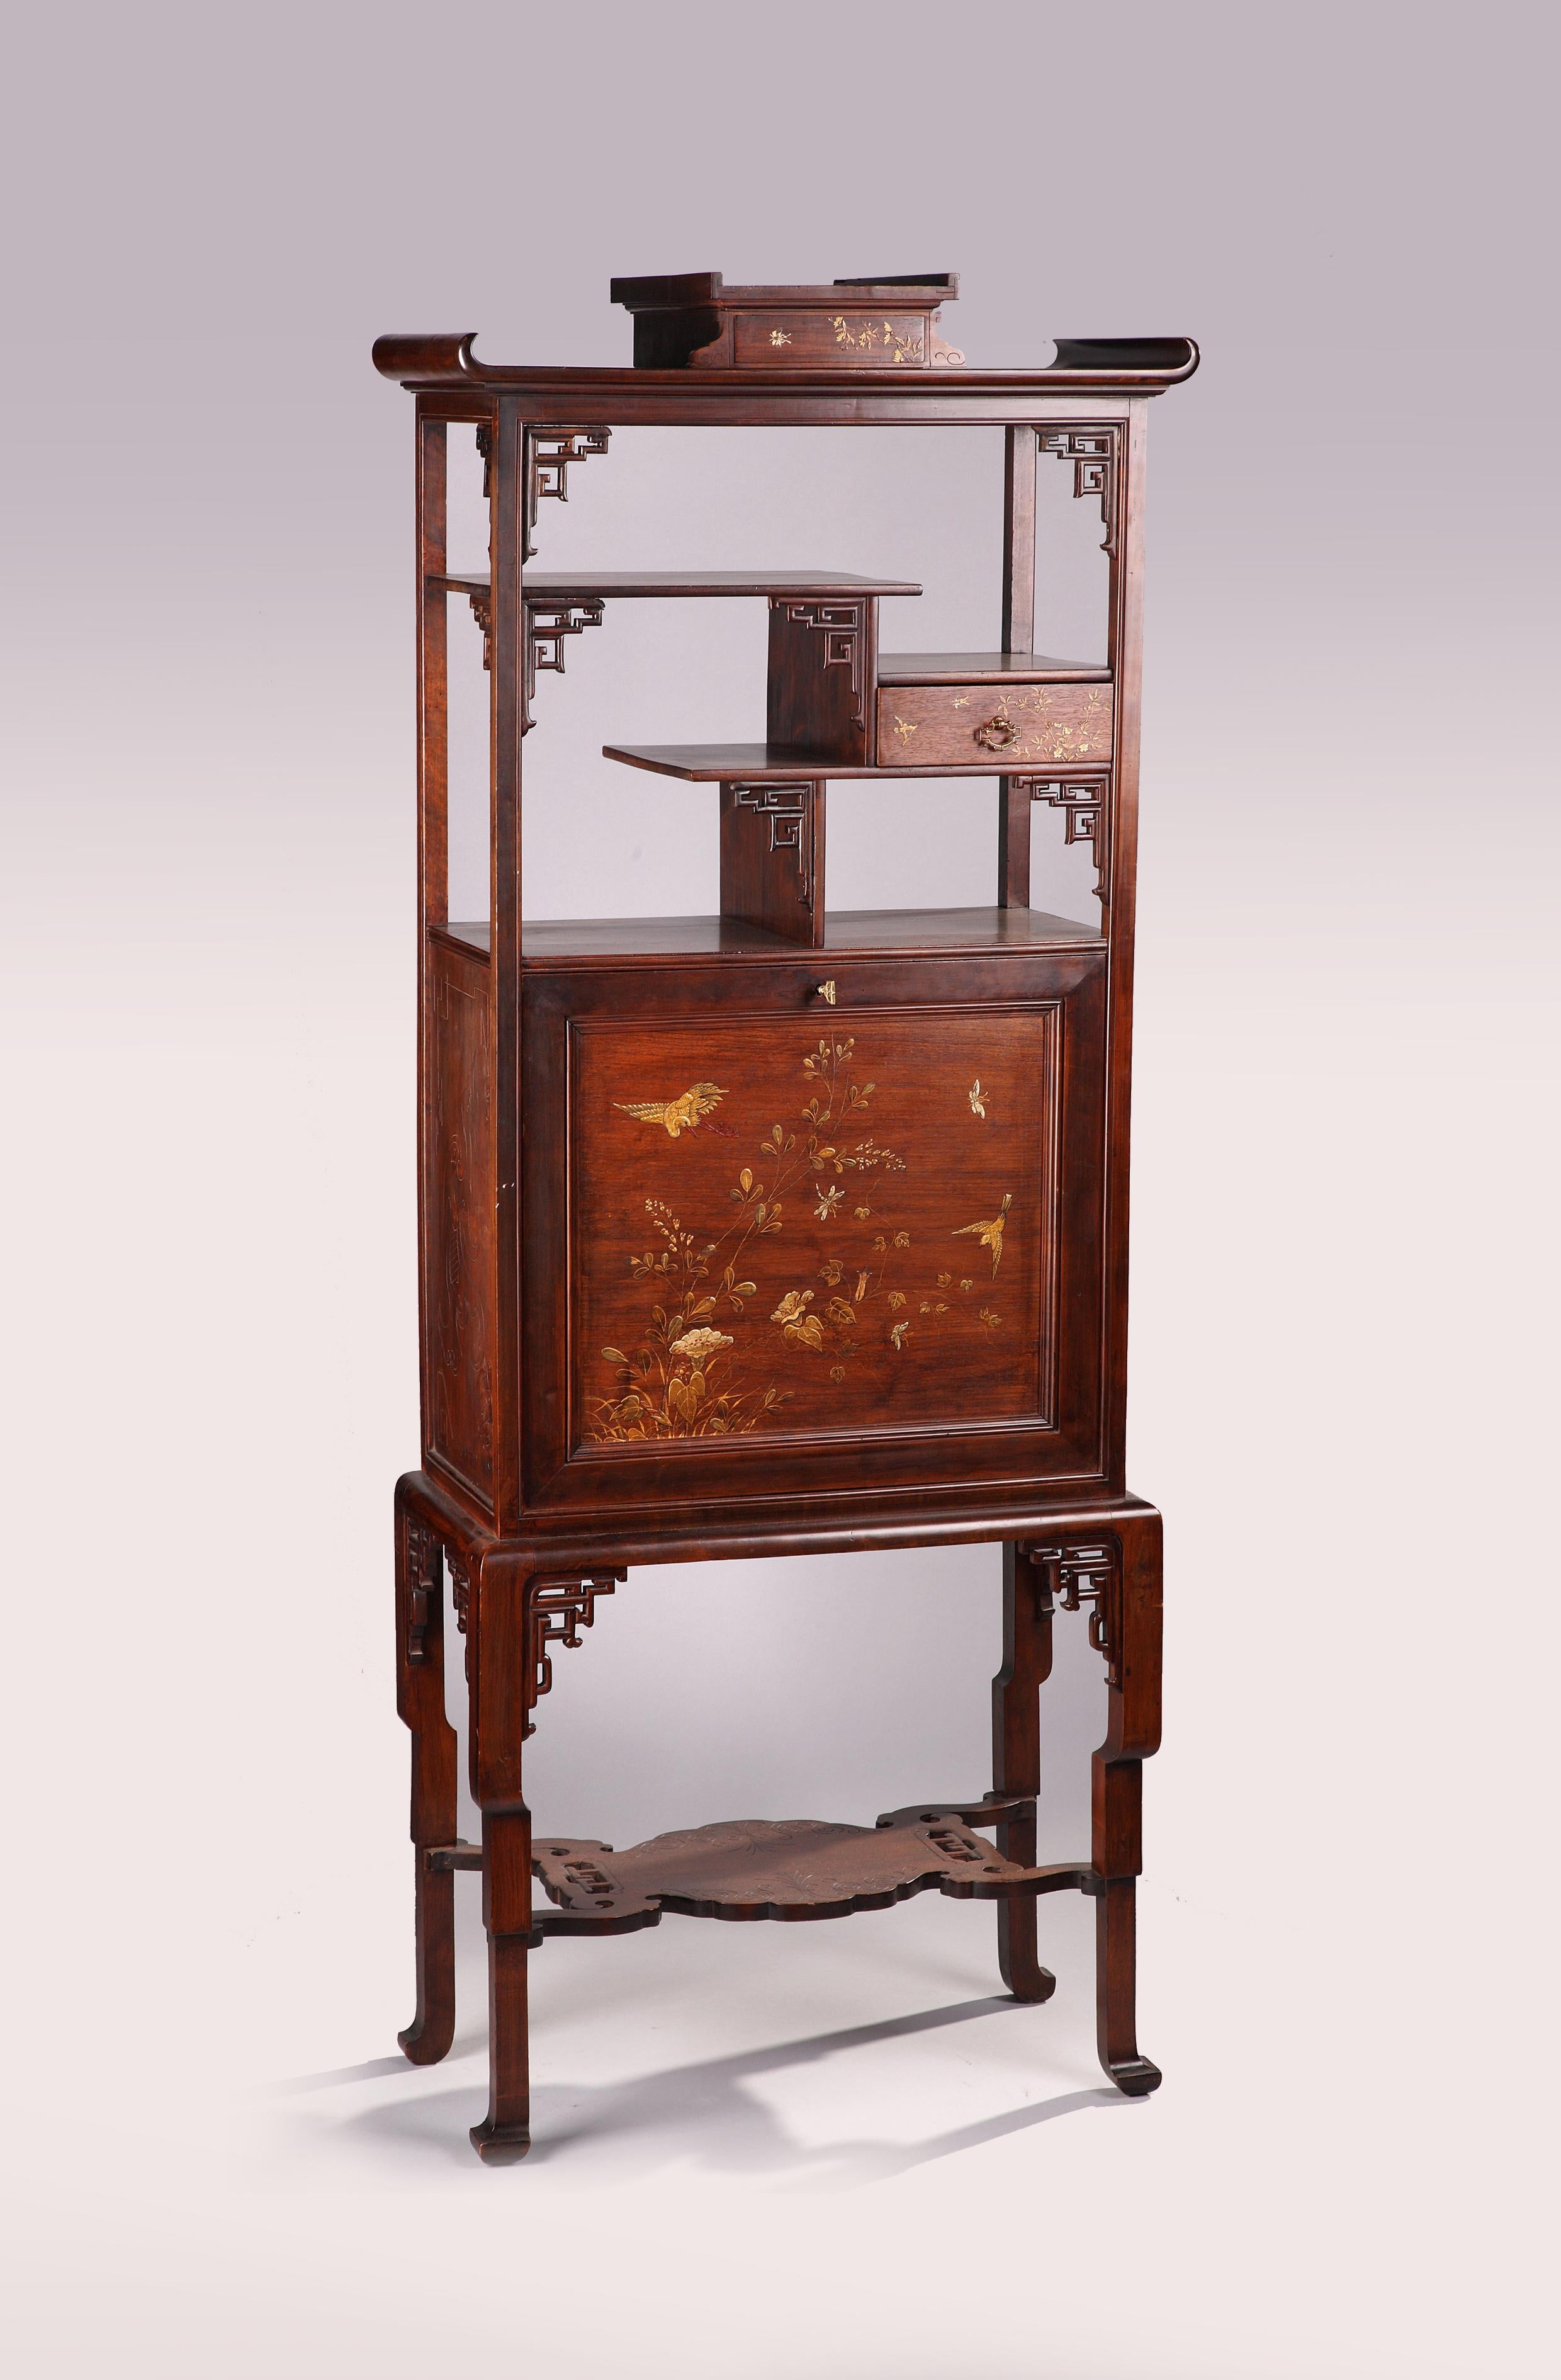 A Japanese style carved wood cabinet, with a painted decor imitating Japanese lacquer, ornamented with flowers, birds and butterflies. Opening onto two drawers and a paper filer, the upright-secretary door is also fitted with red velvet. Surmounted